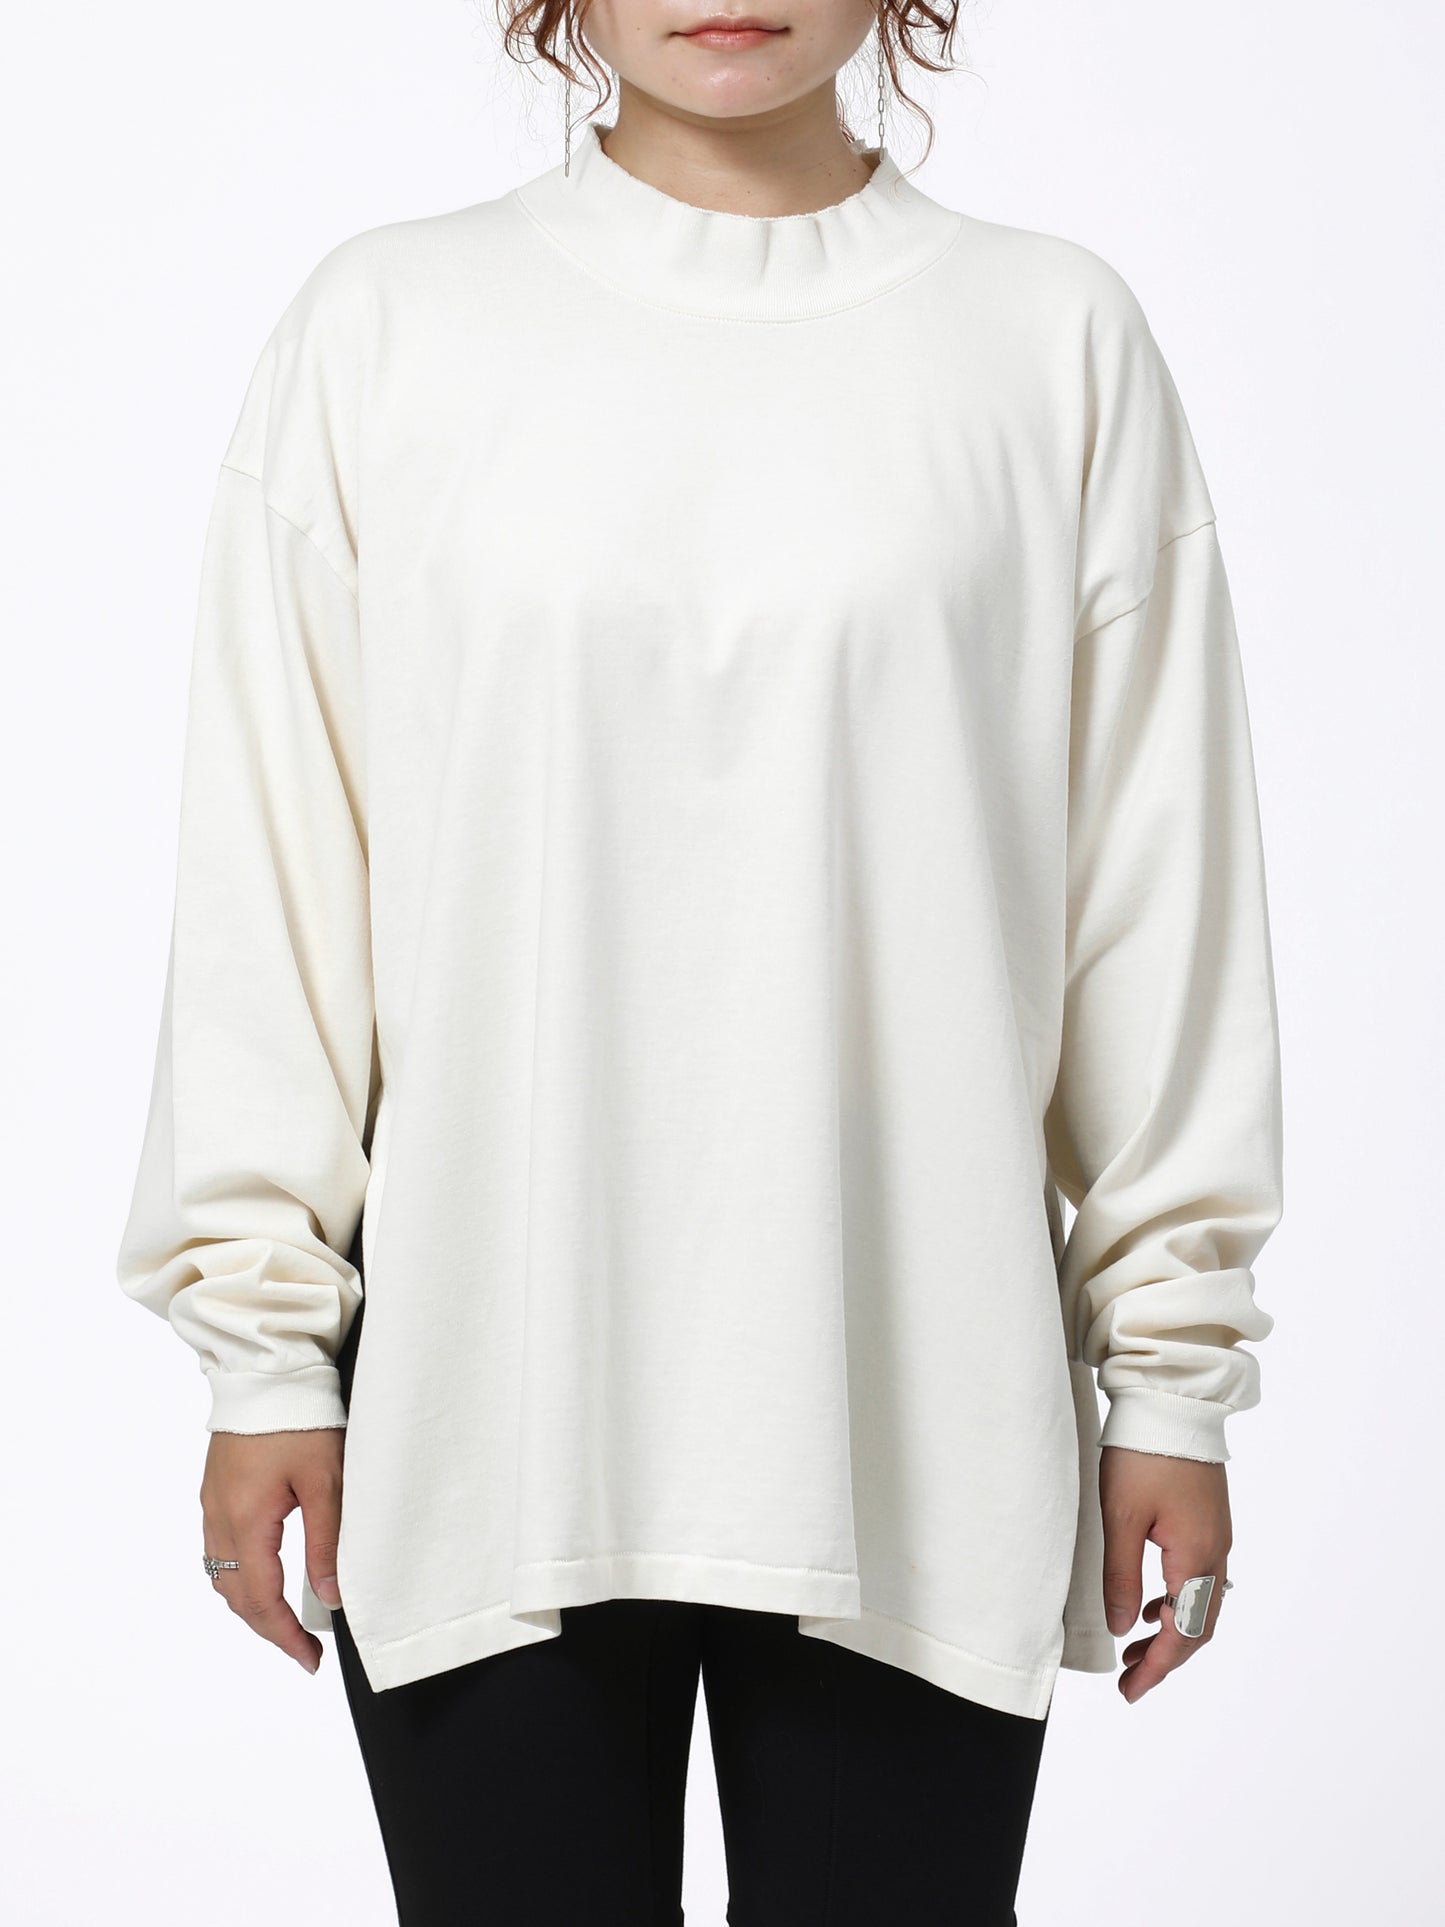 BAGGY L/S TEE COTTON JERSEY AM-C0312 Off white